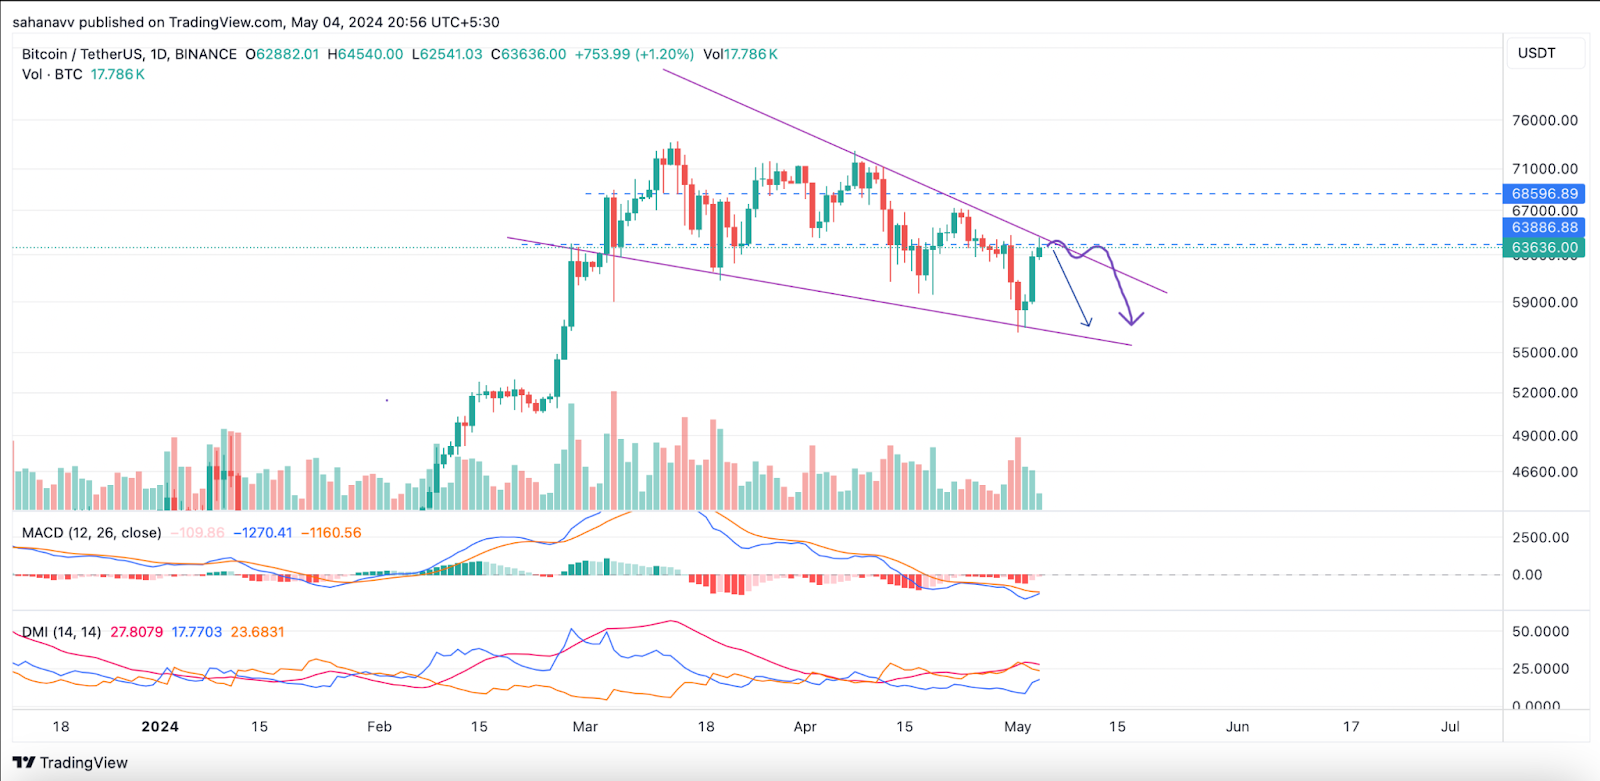 BTC Price Continues to Trade Within Narrow Range: Here’s Why There Is No Growth After the Bitcoin Halving